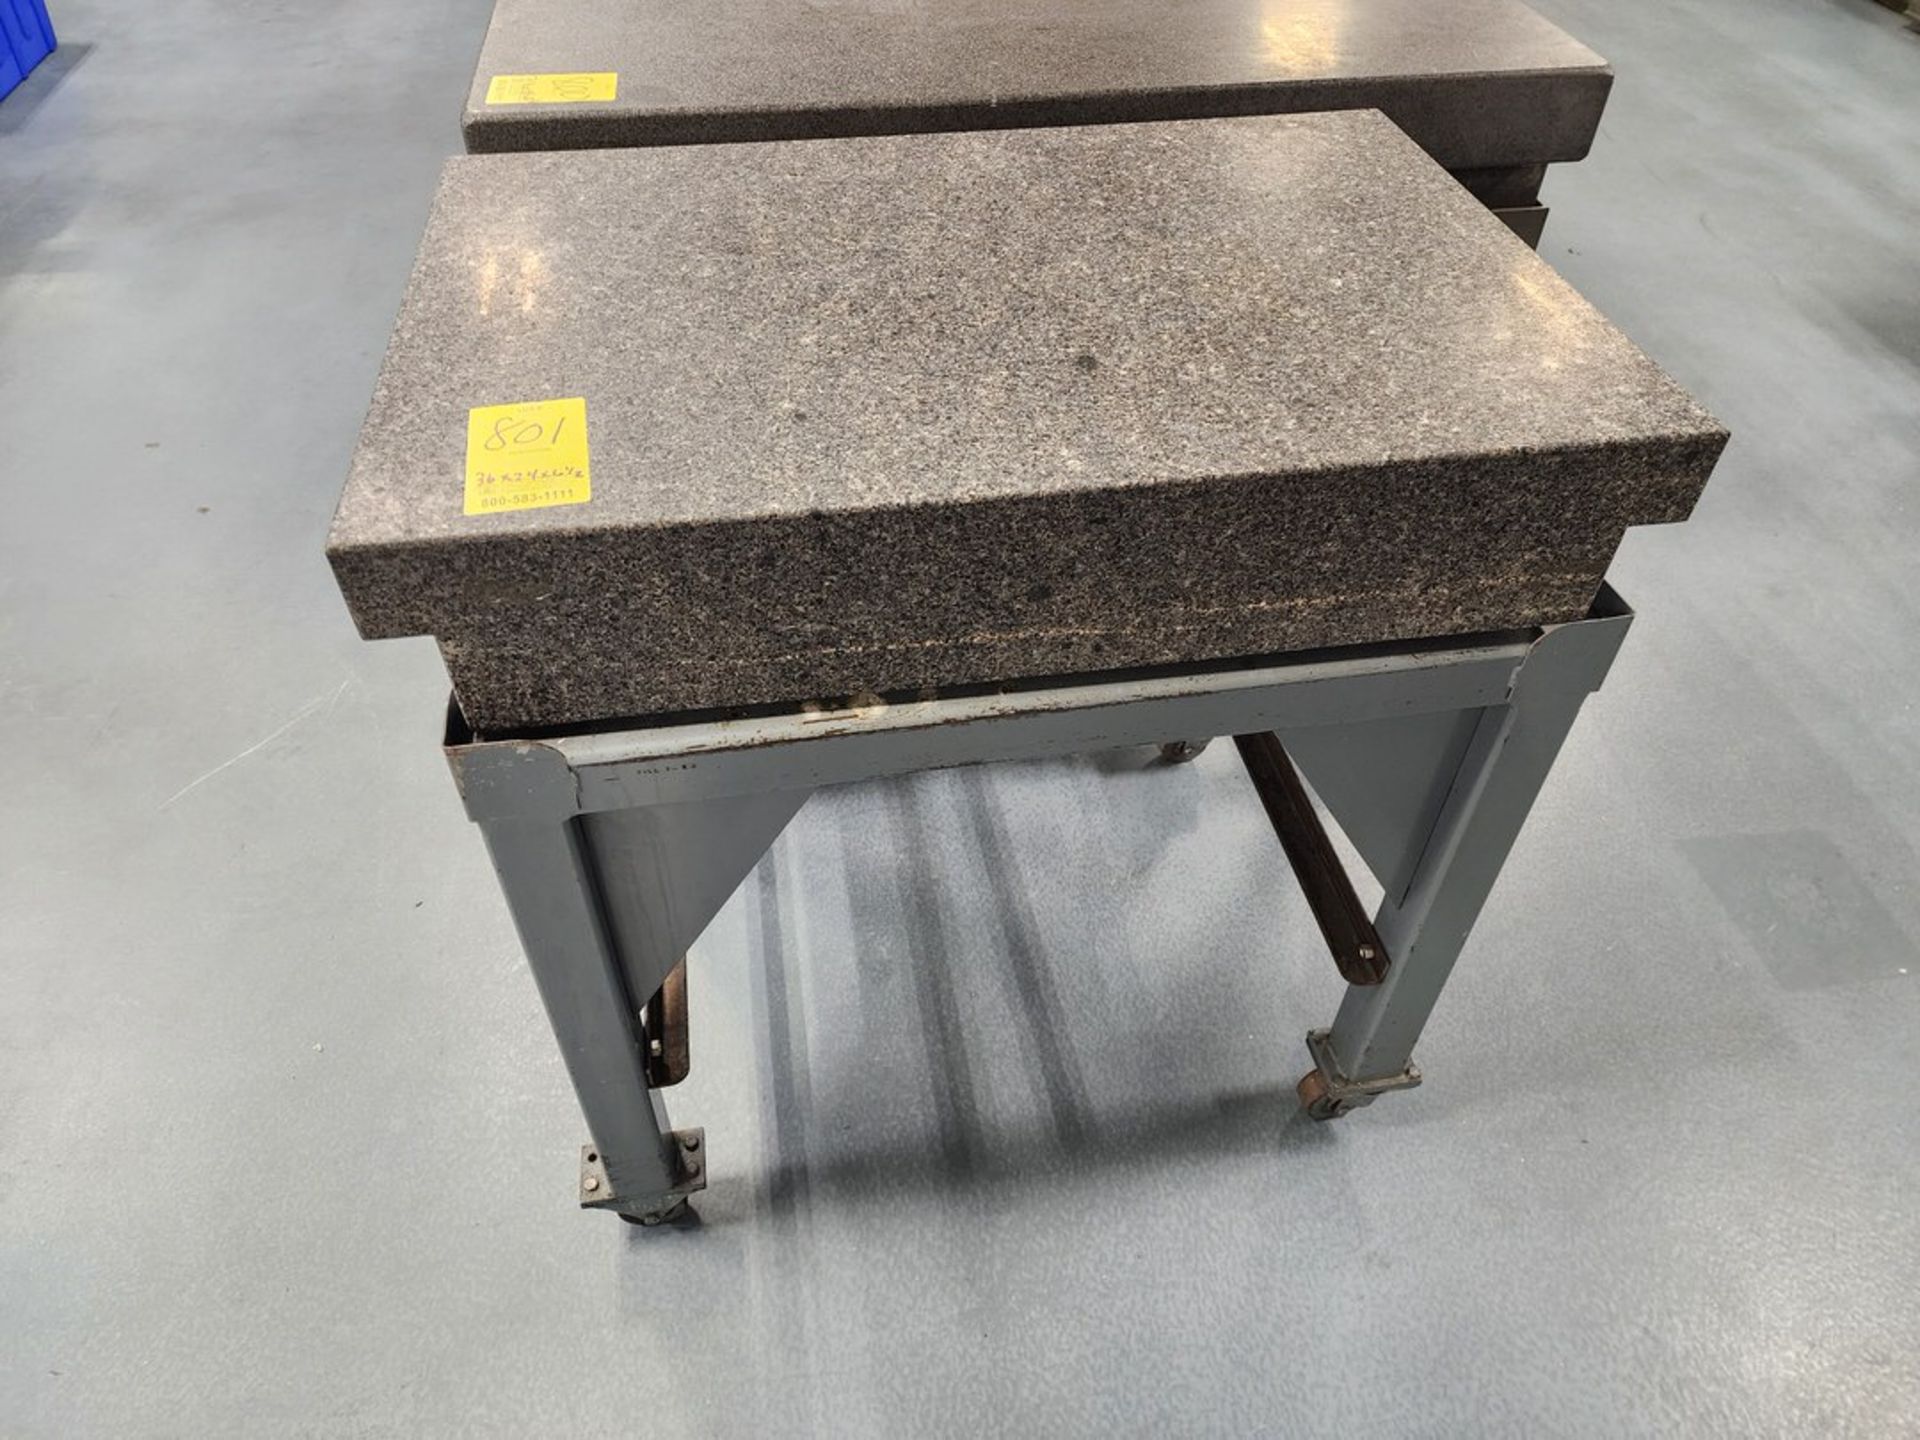 Surface Granite Plate W/ Stand 36" x 24" x 6-1/2"